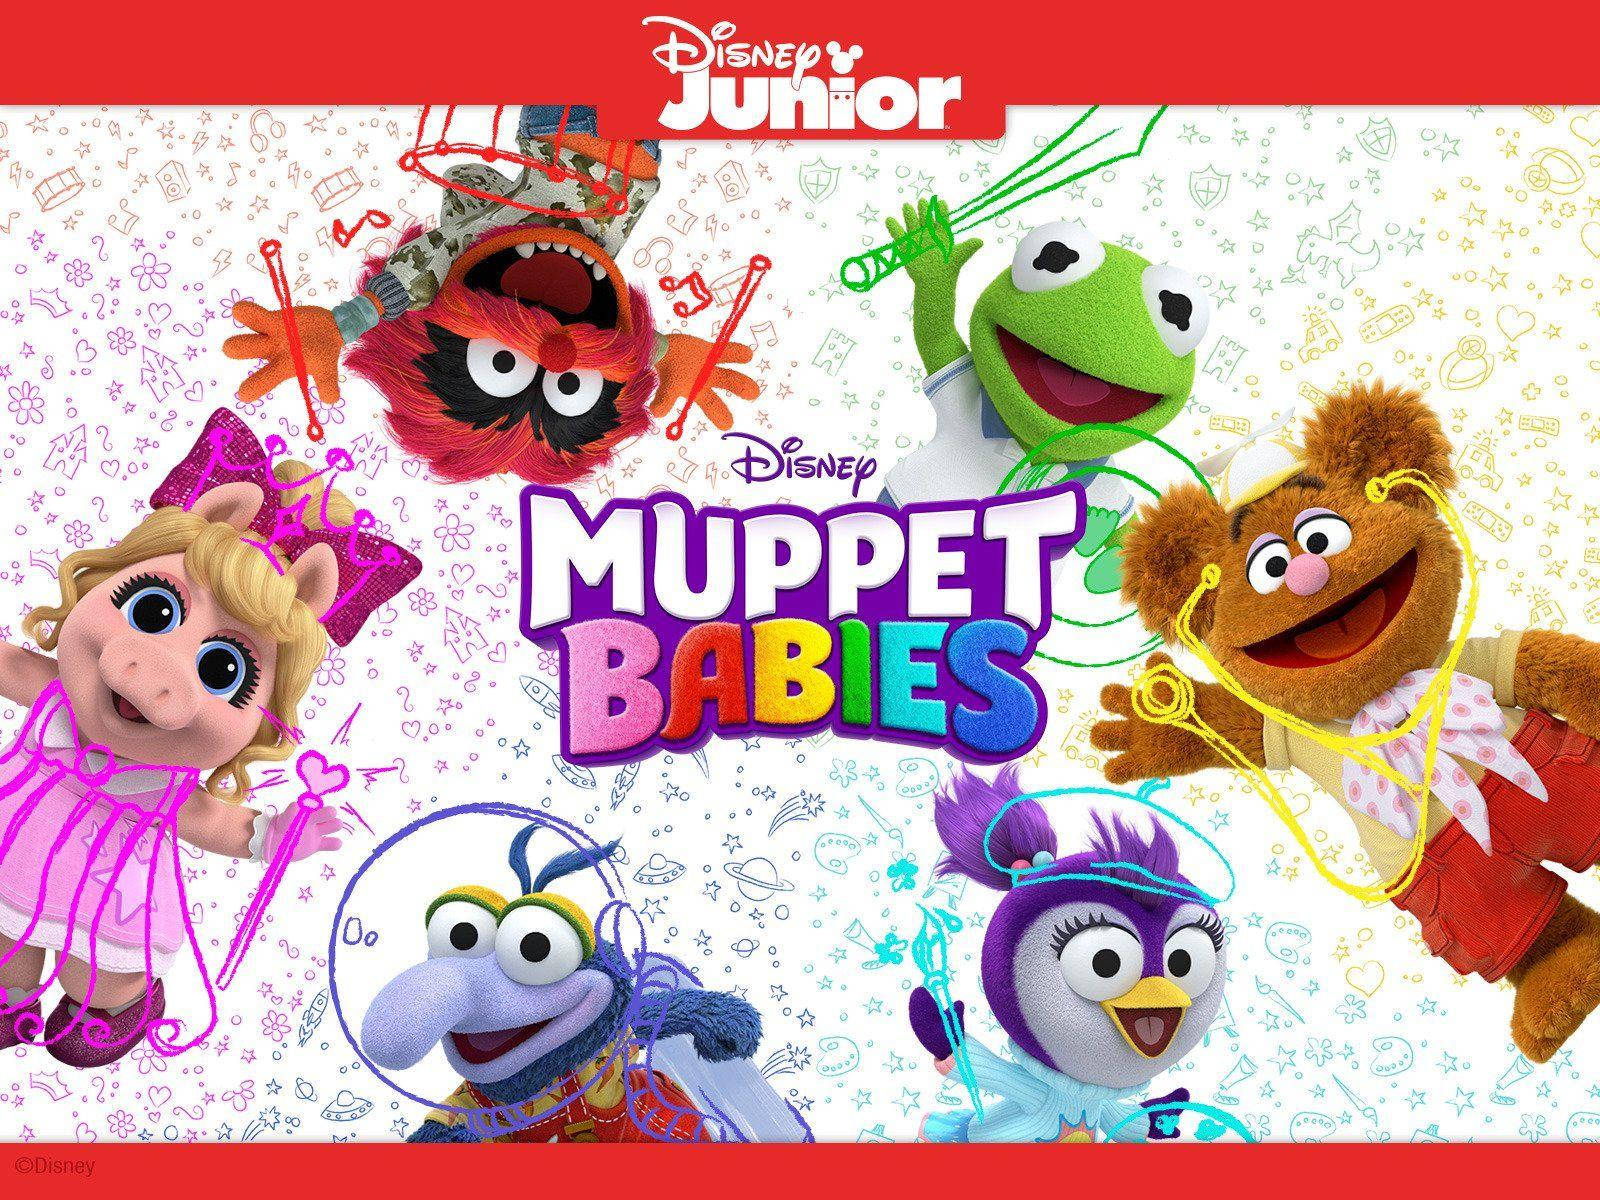 Disney Muppet Babies Characters Poster